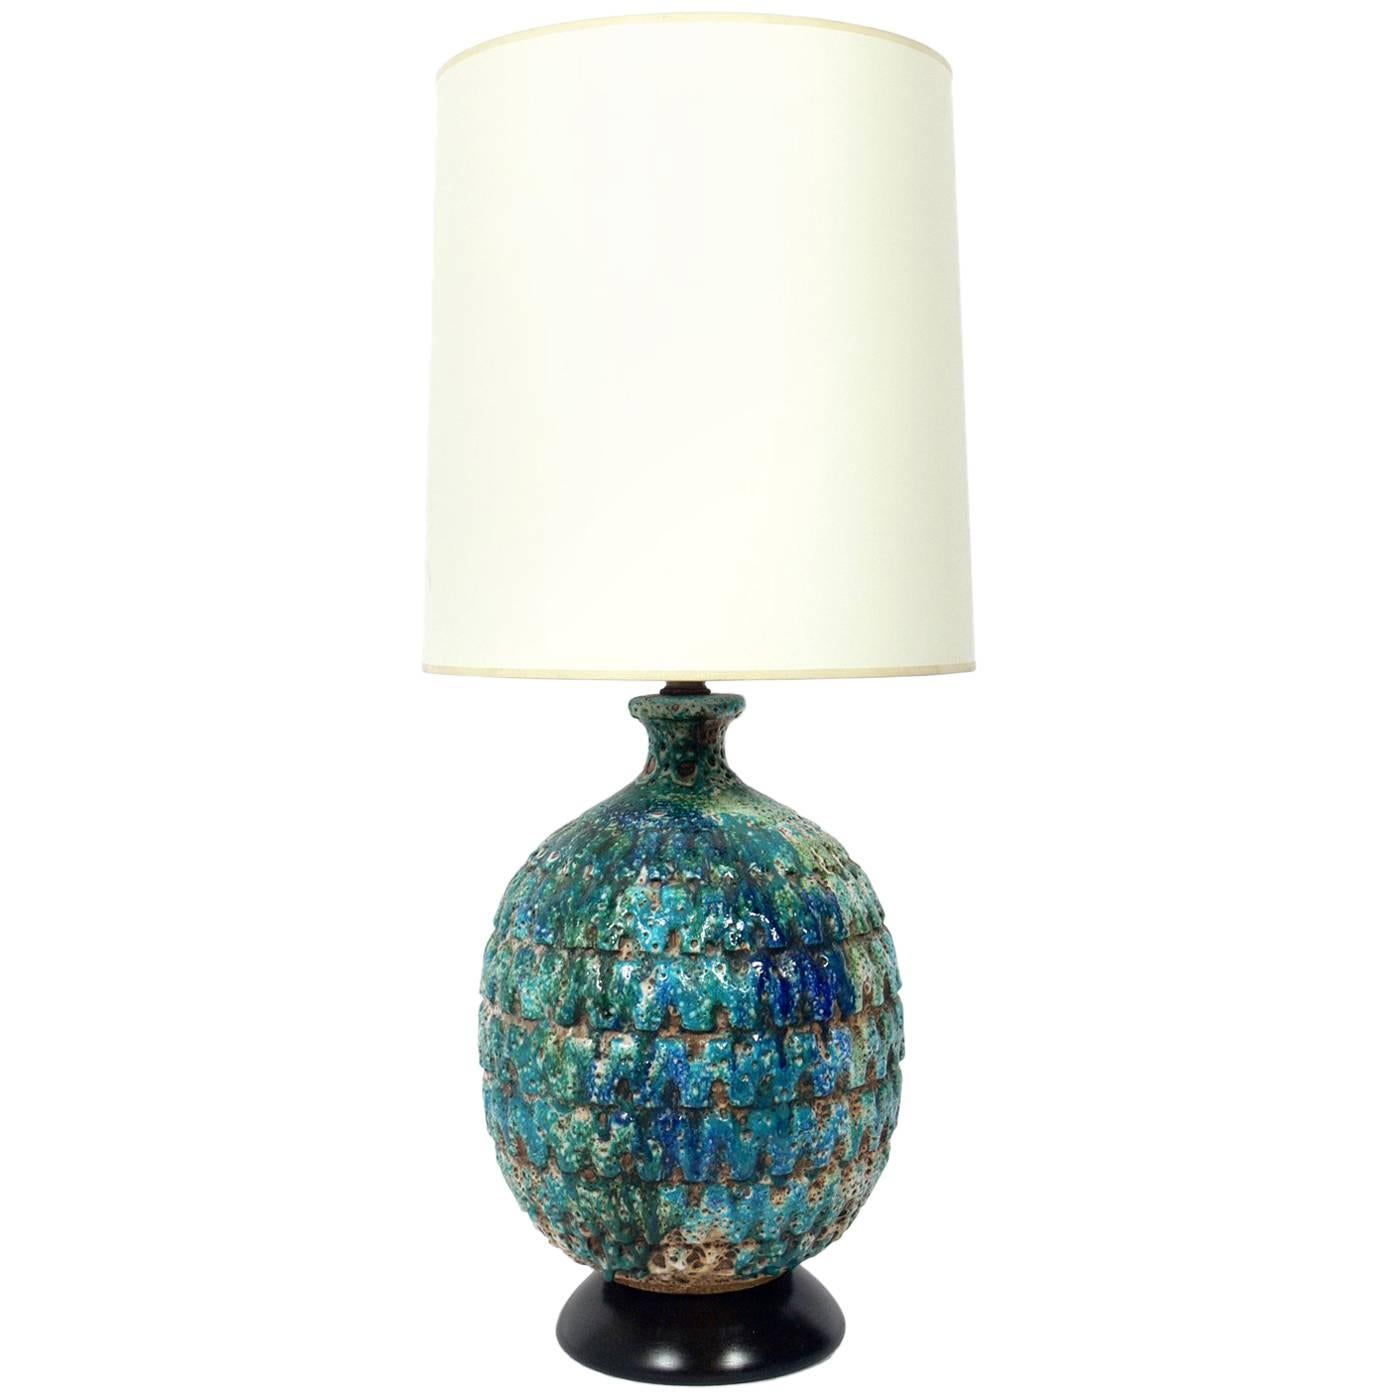 Large-Scale Italian Pottery Lamp in Vibrant Blue Greens